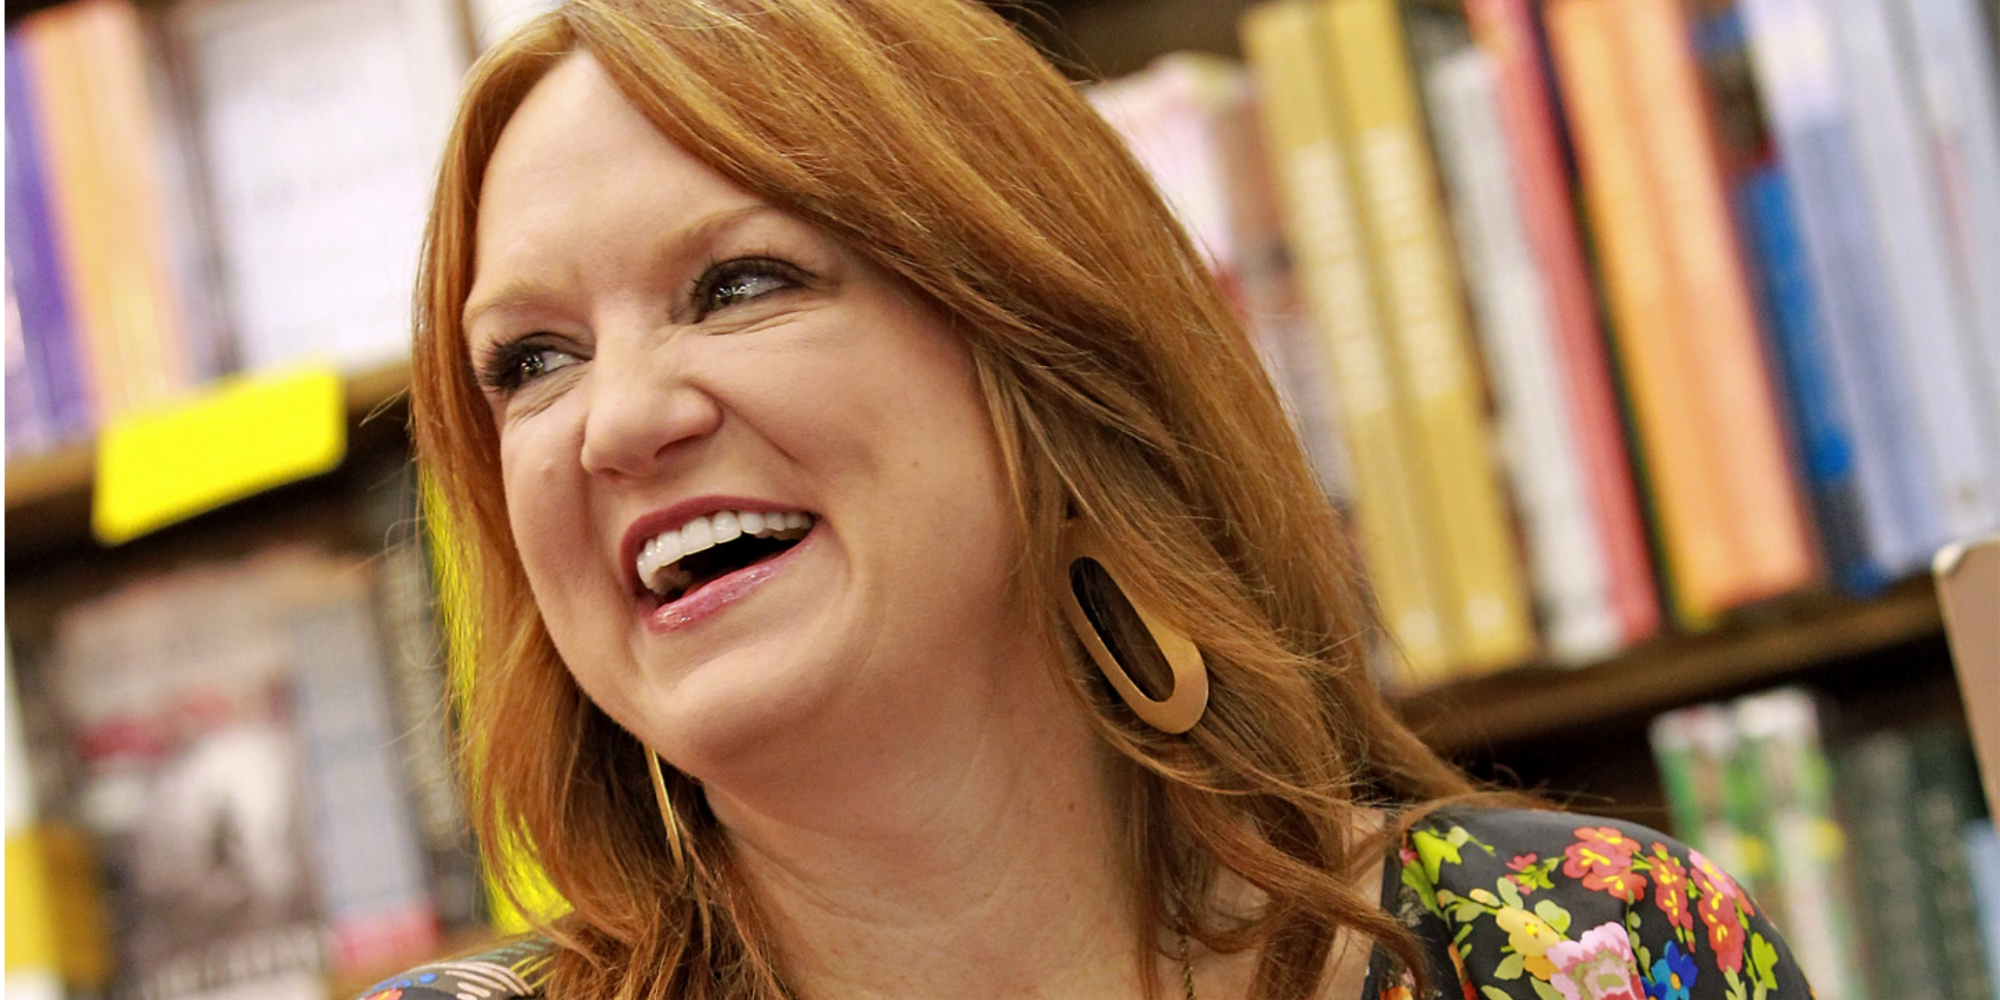 'The Pioneer Woman' star Ree Drummond appears during a book singing in 2012.